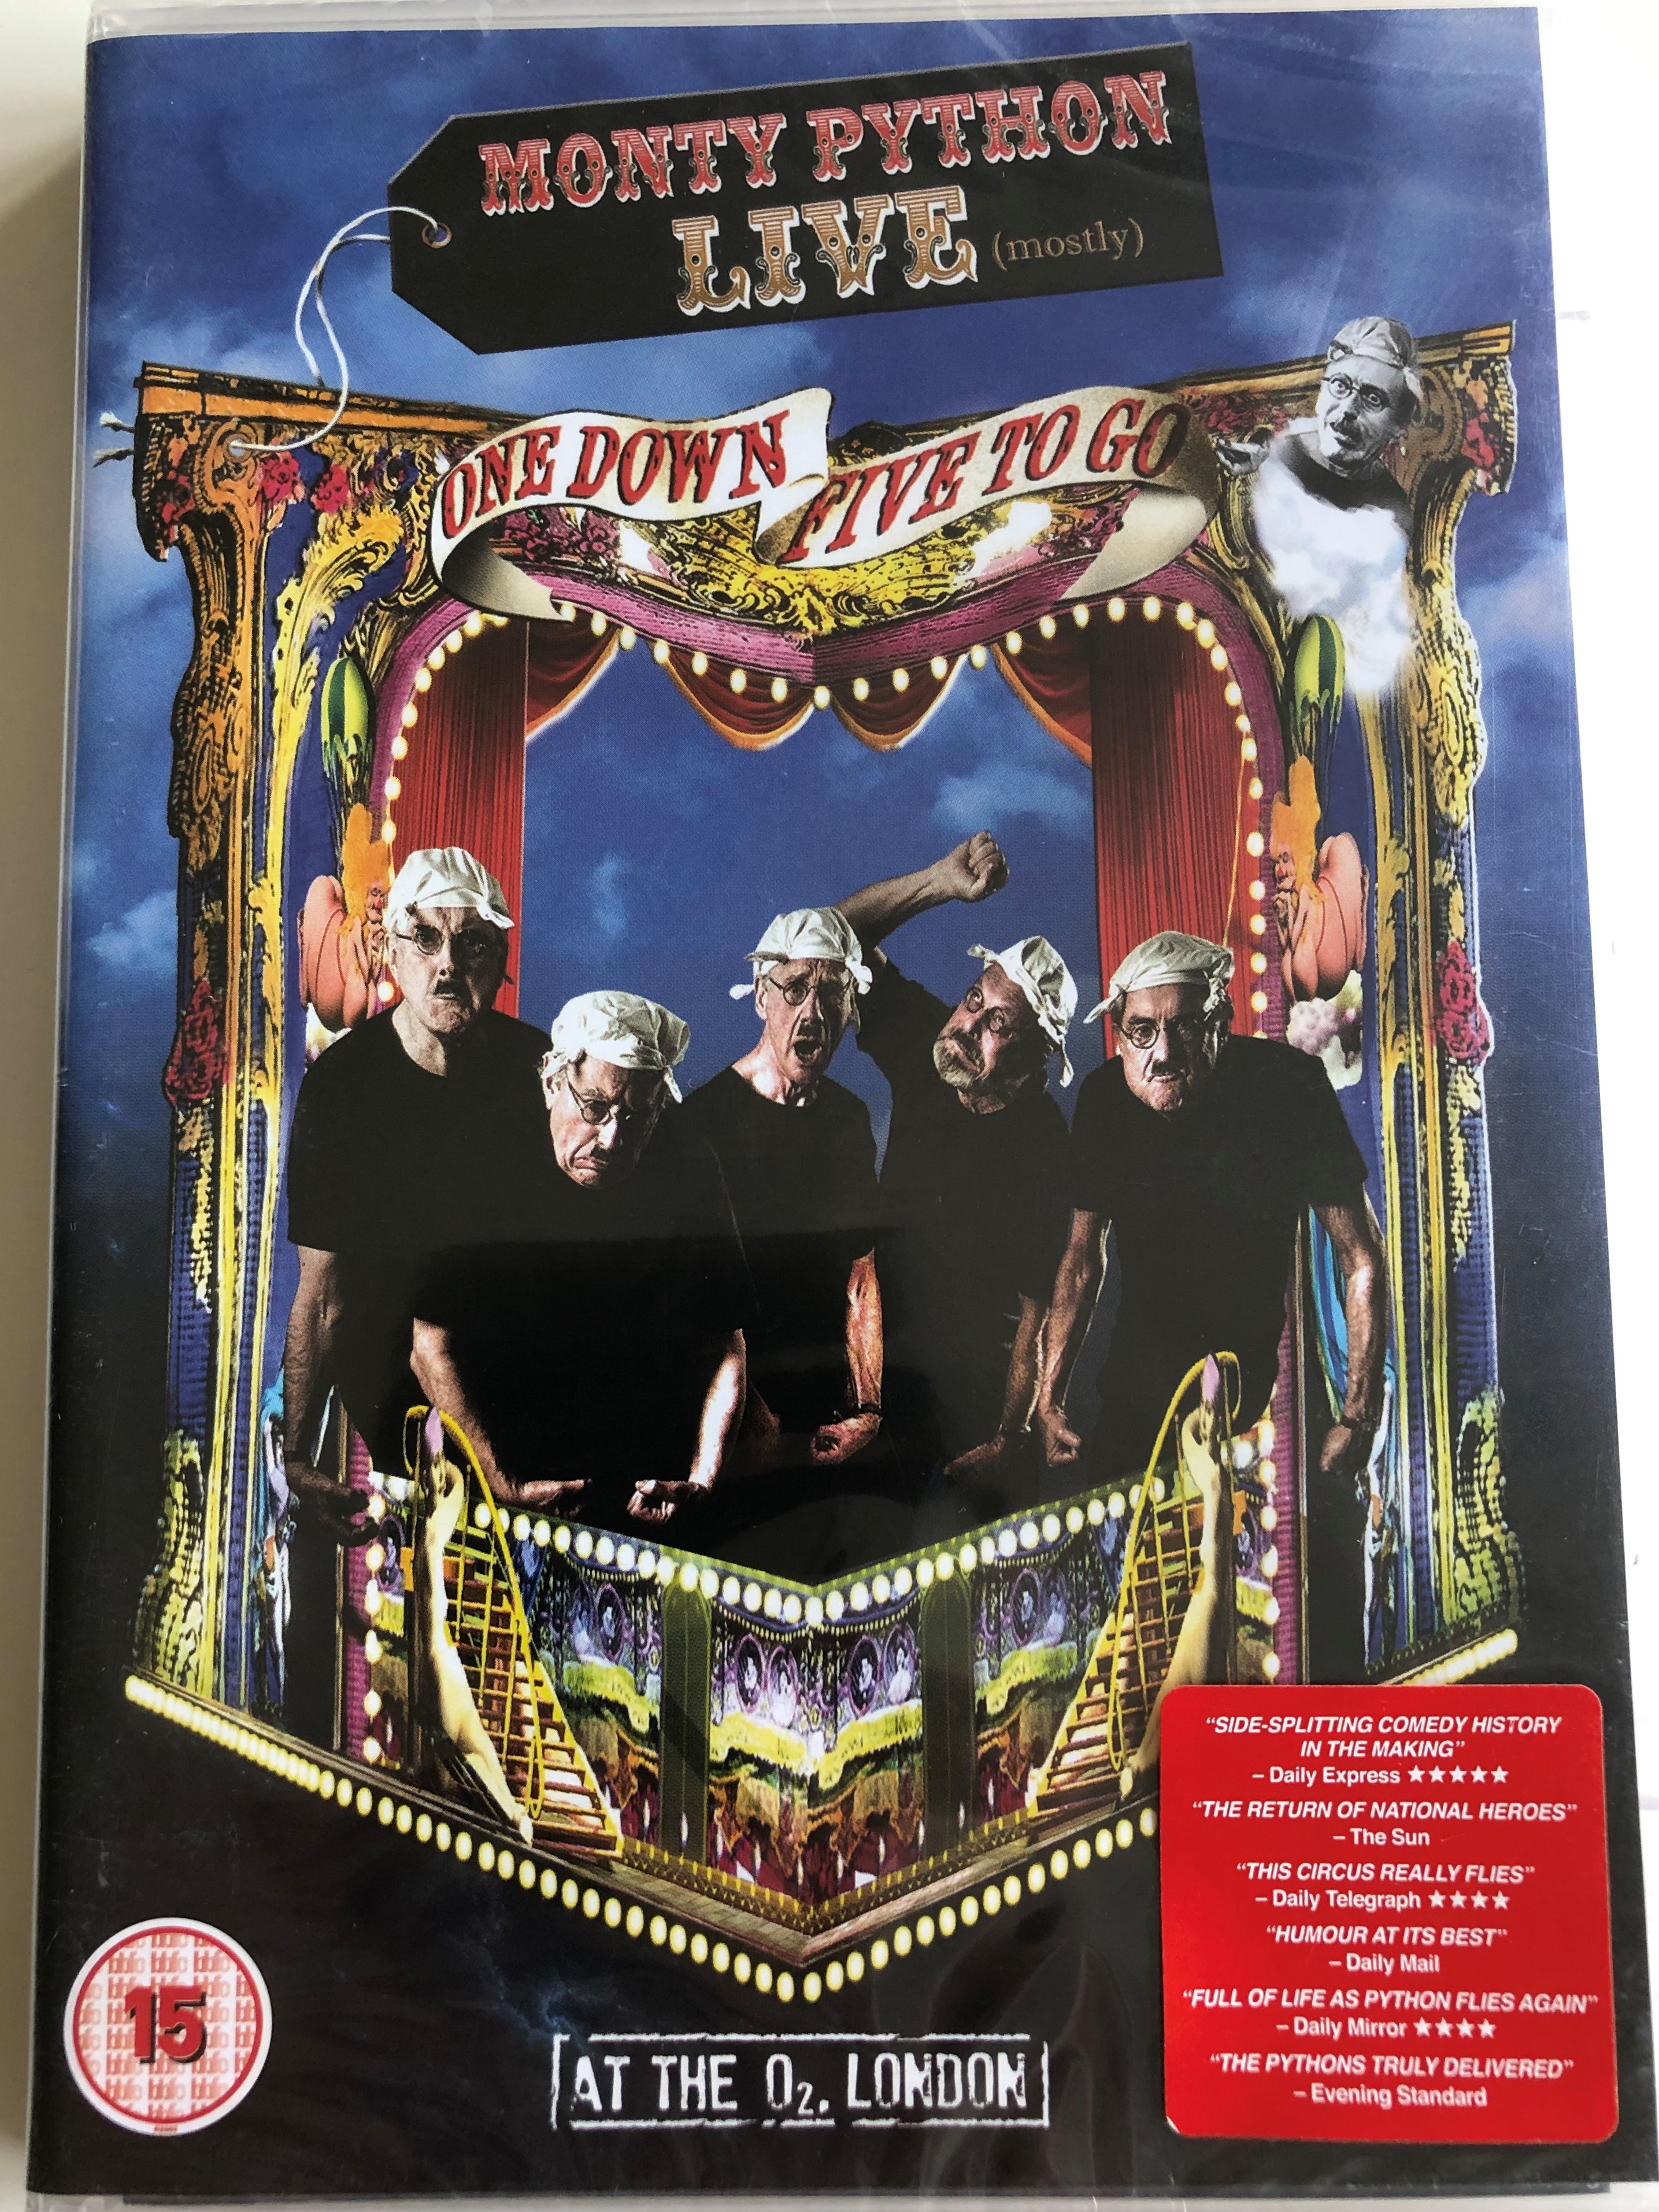 monty-python-live-mostly-one-down-five-to-go-dvd-2014-written-be-graham-chapman-john-cleese-terry-gilliam-eric-idle-terry-jones-michael-palin-1-.jpg